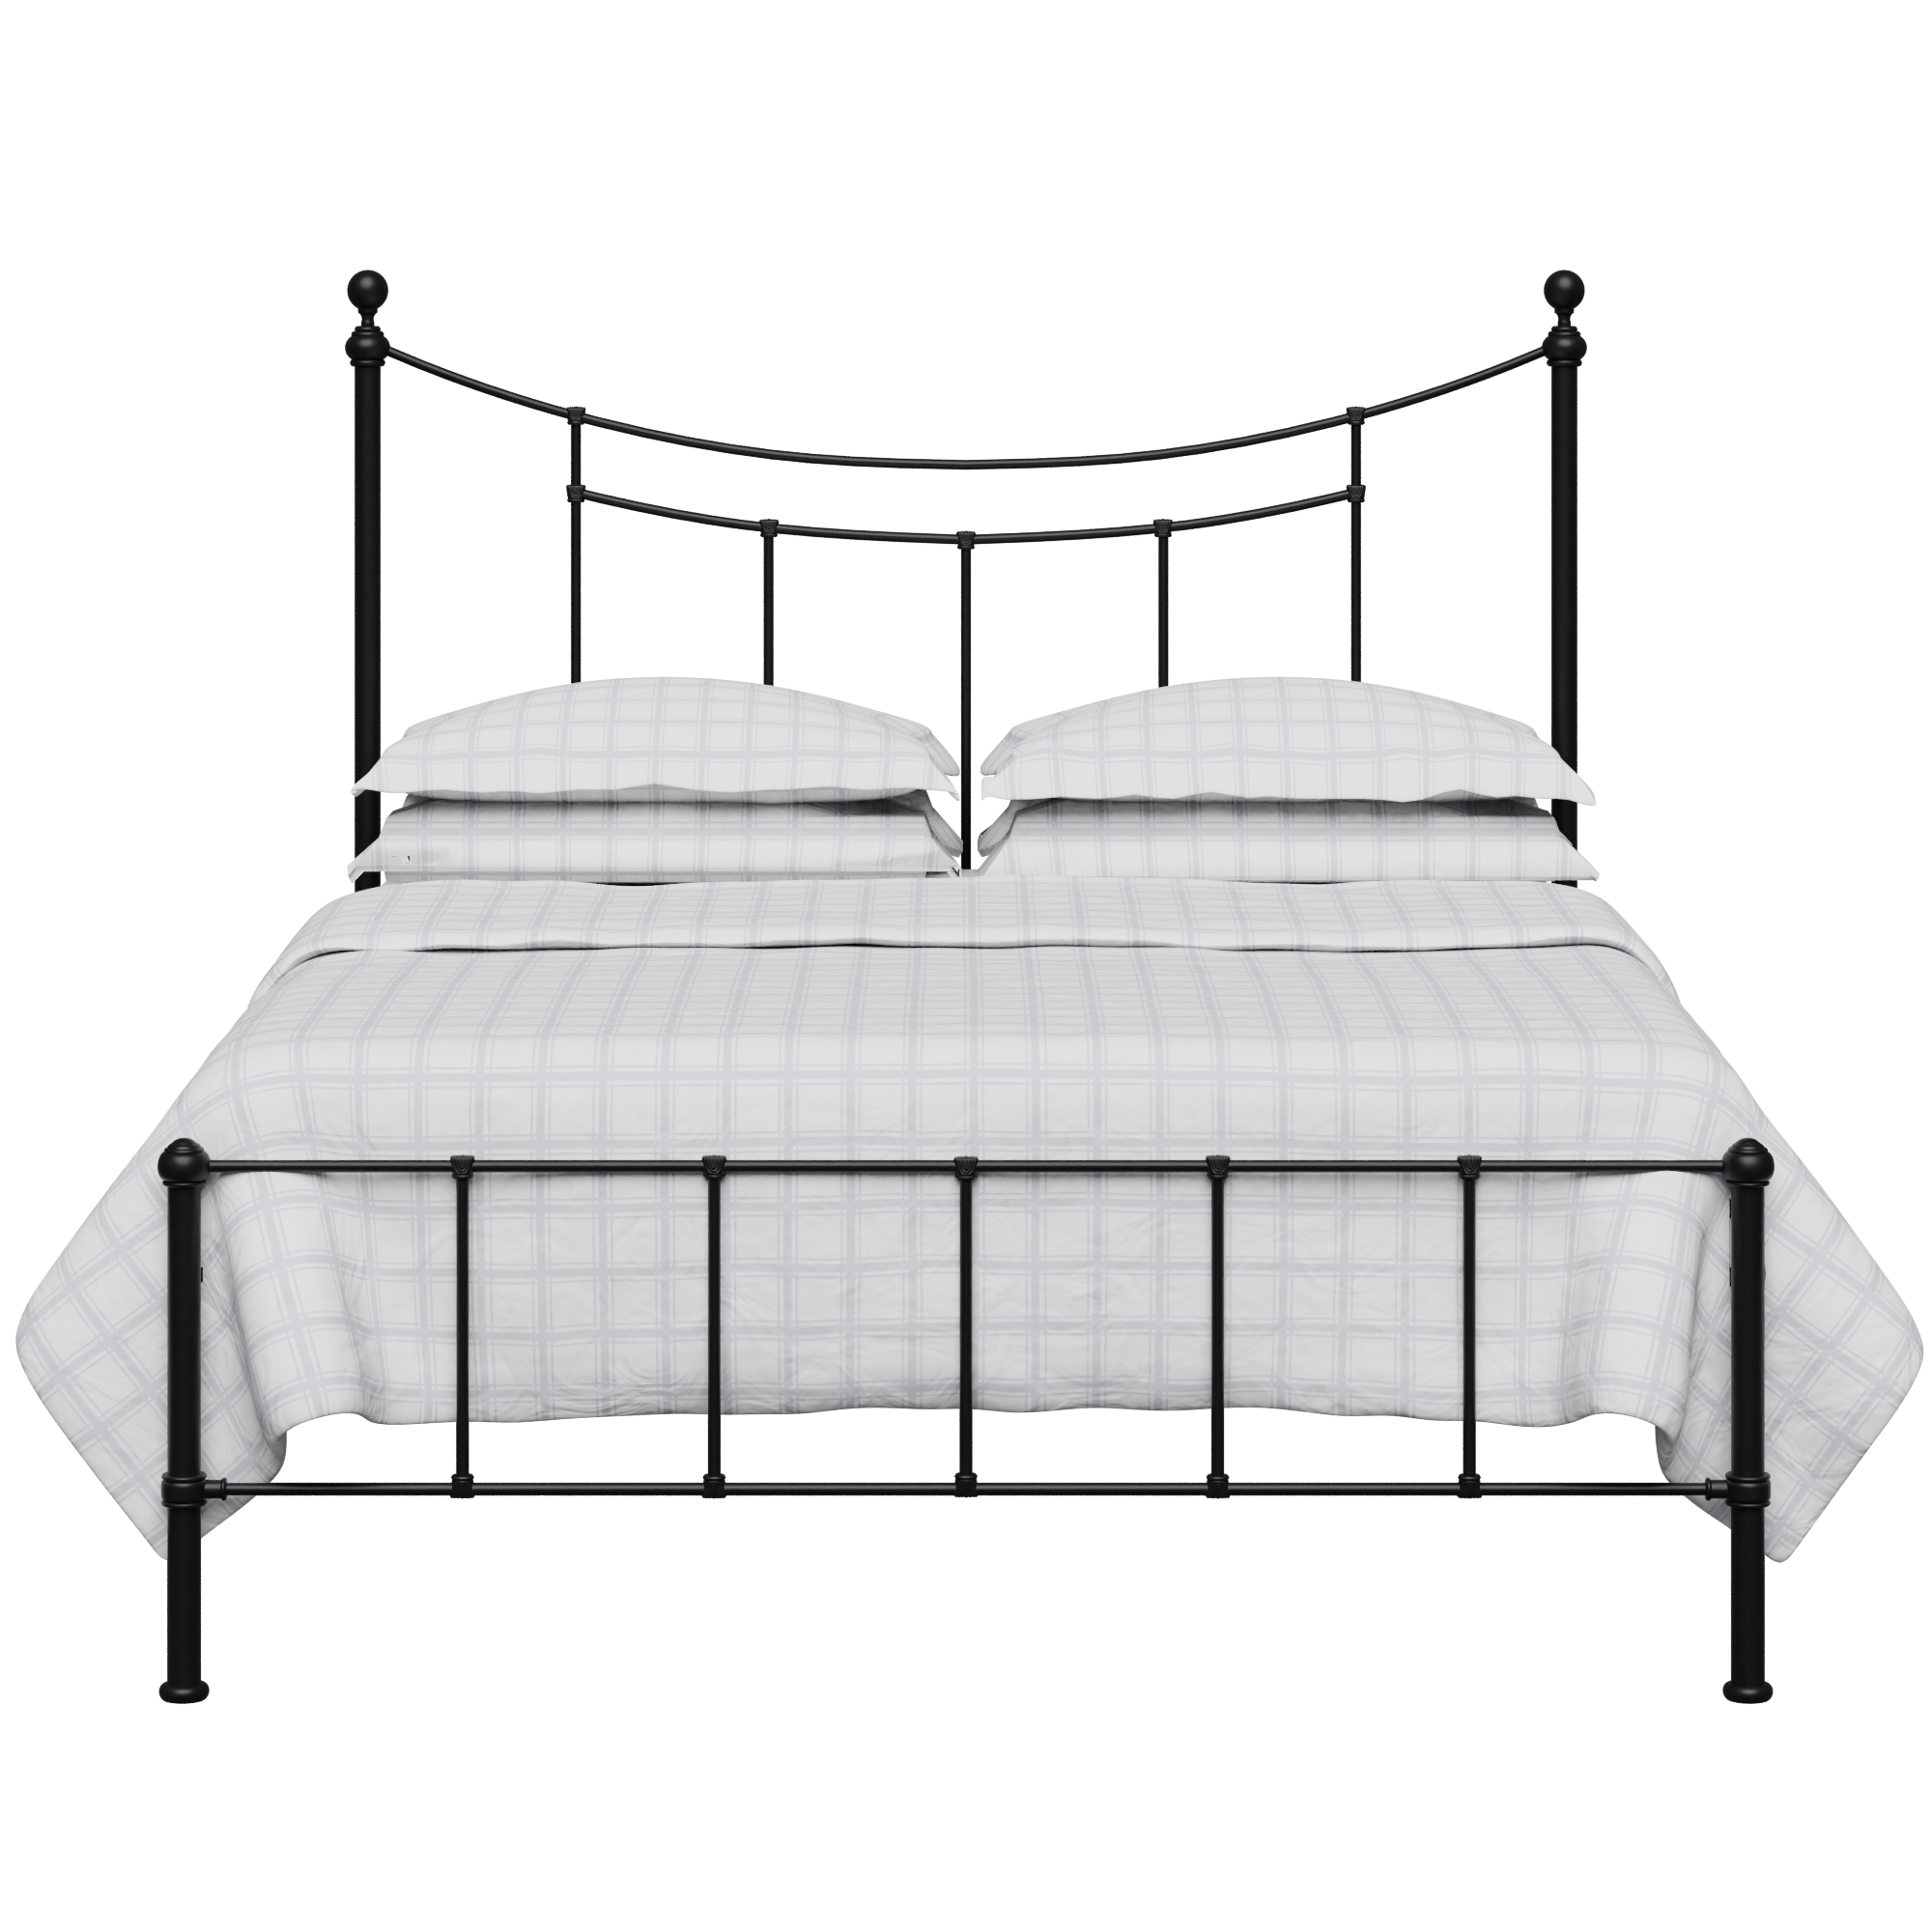 Isabelle iron/metal bed in black